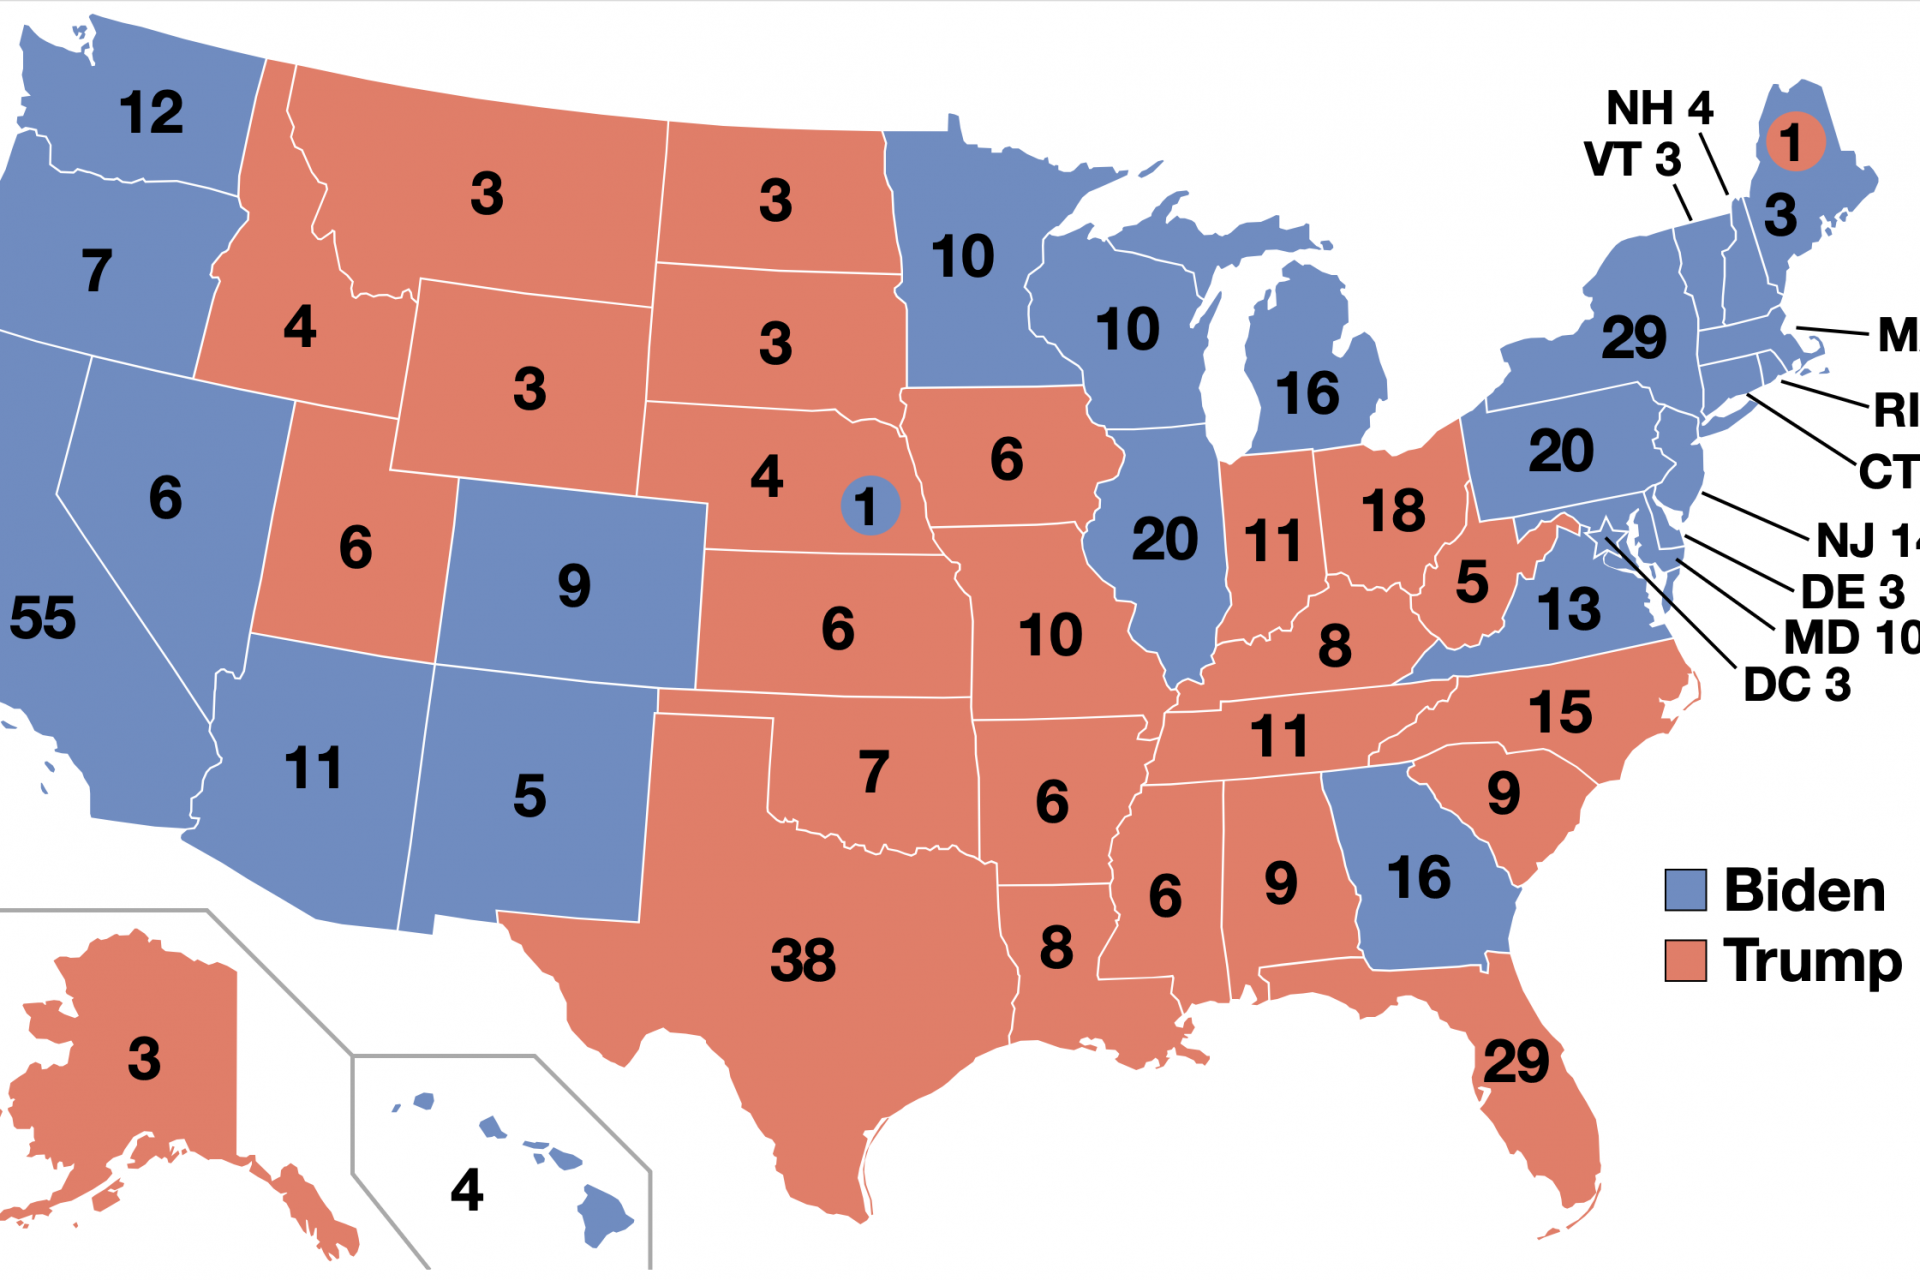 The Electoral College and the presidency 